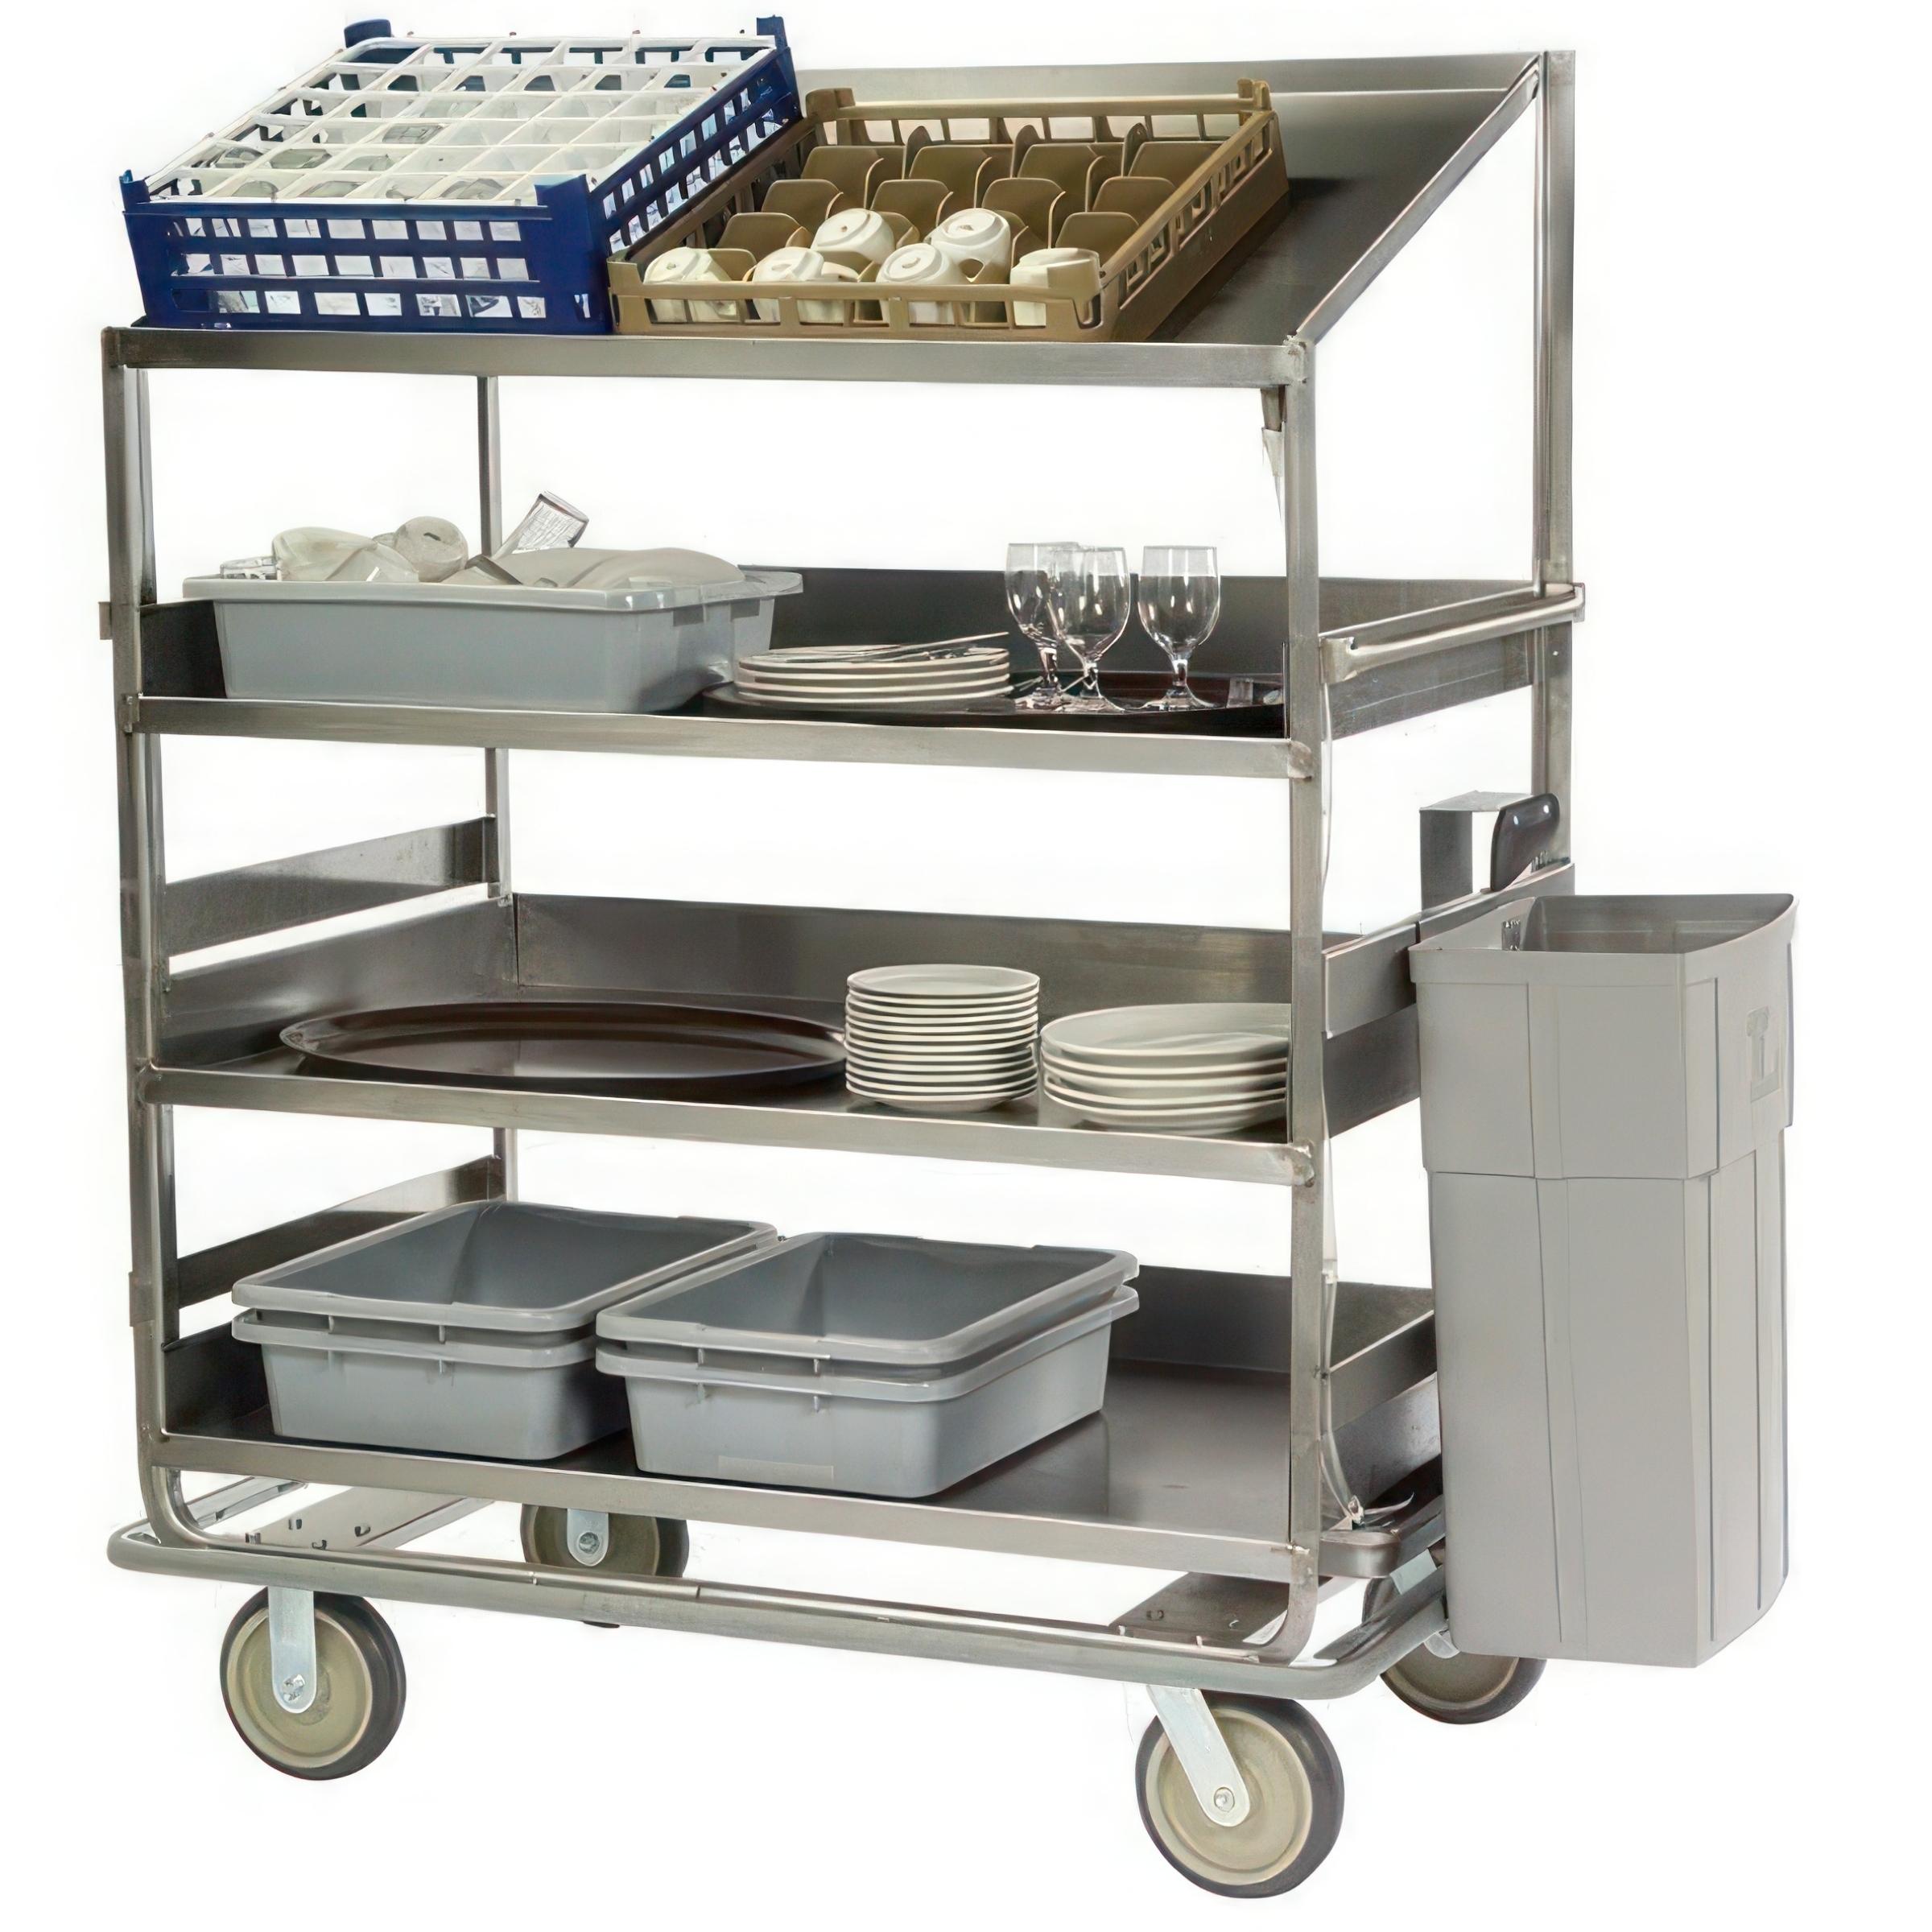 Drying Racks, Experts in Innovative Food Merchandising Solutions